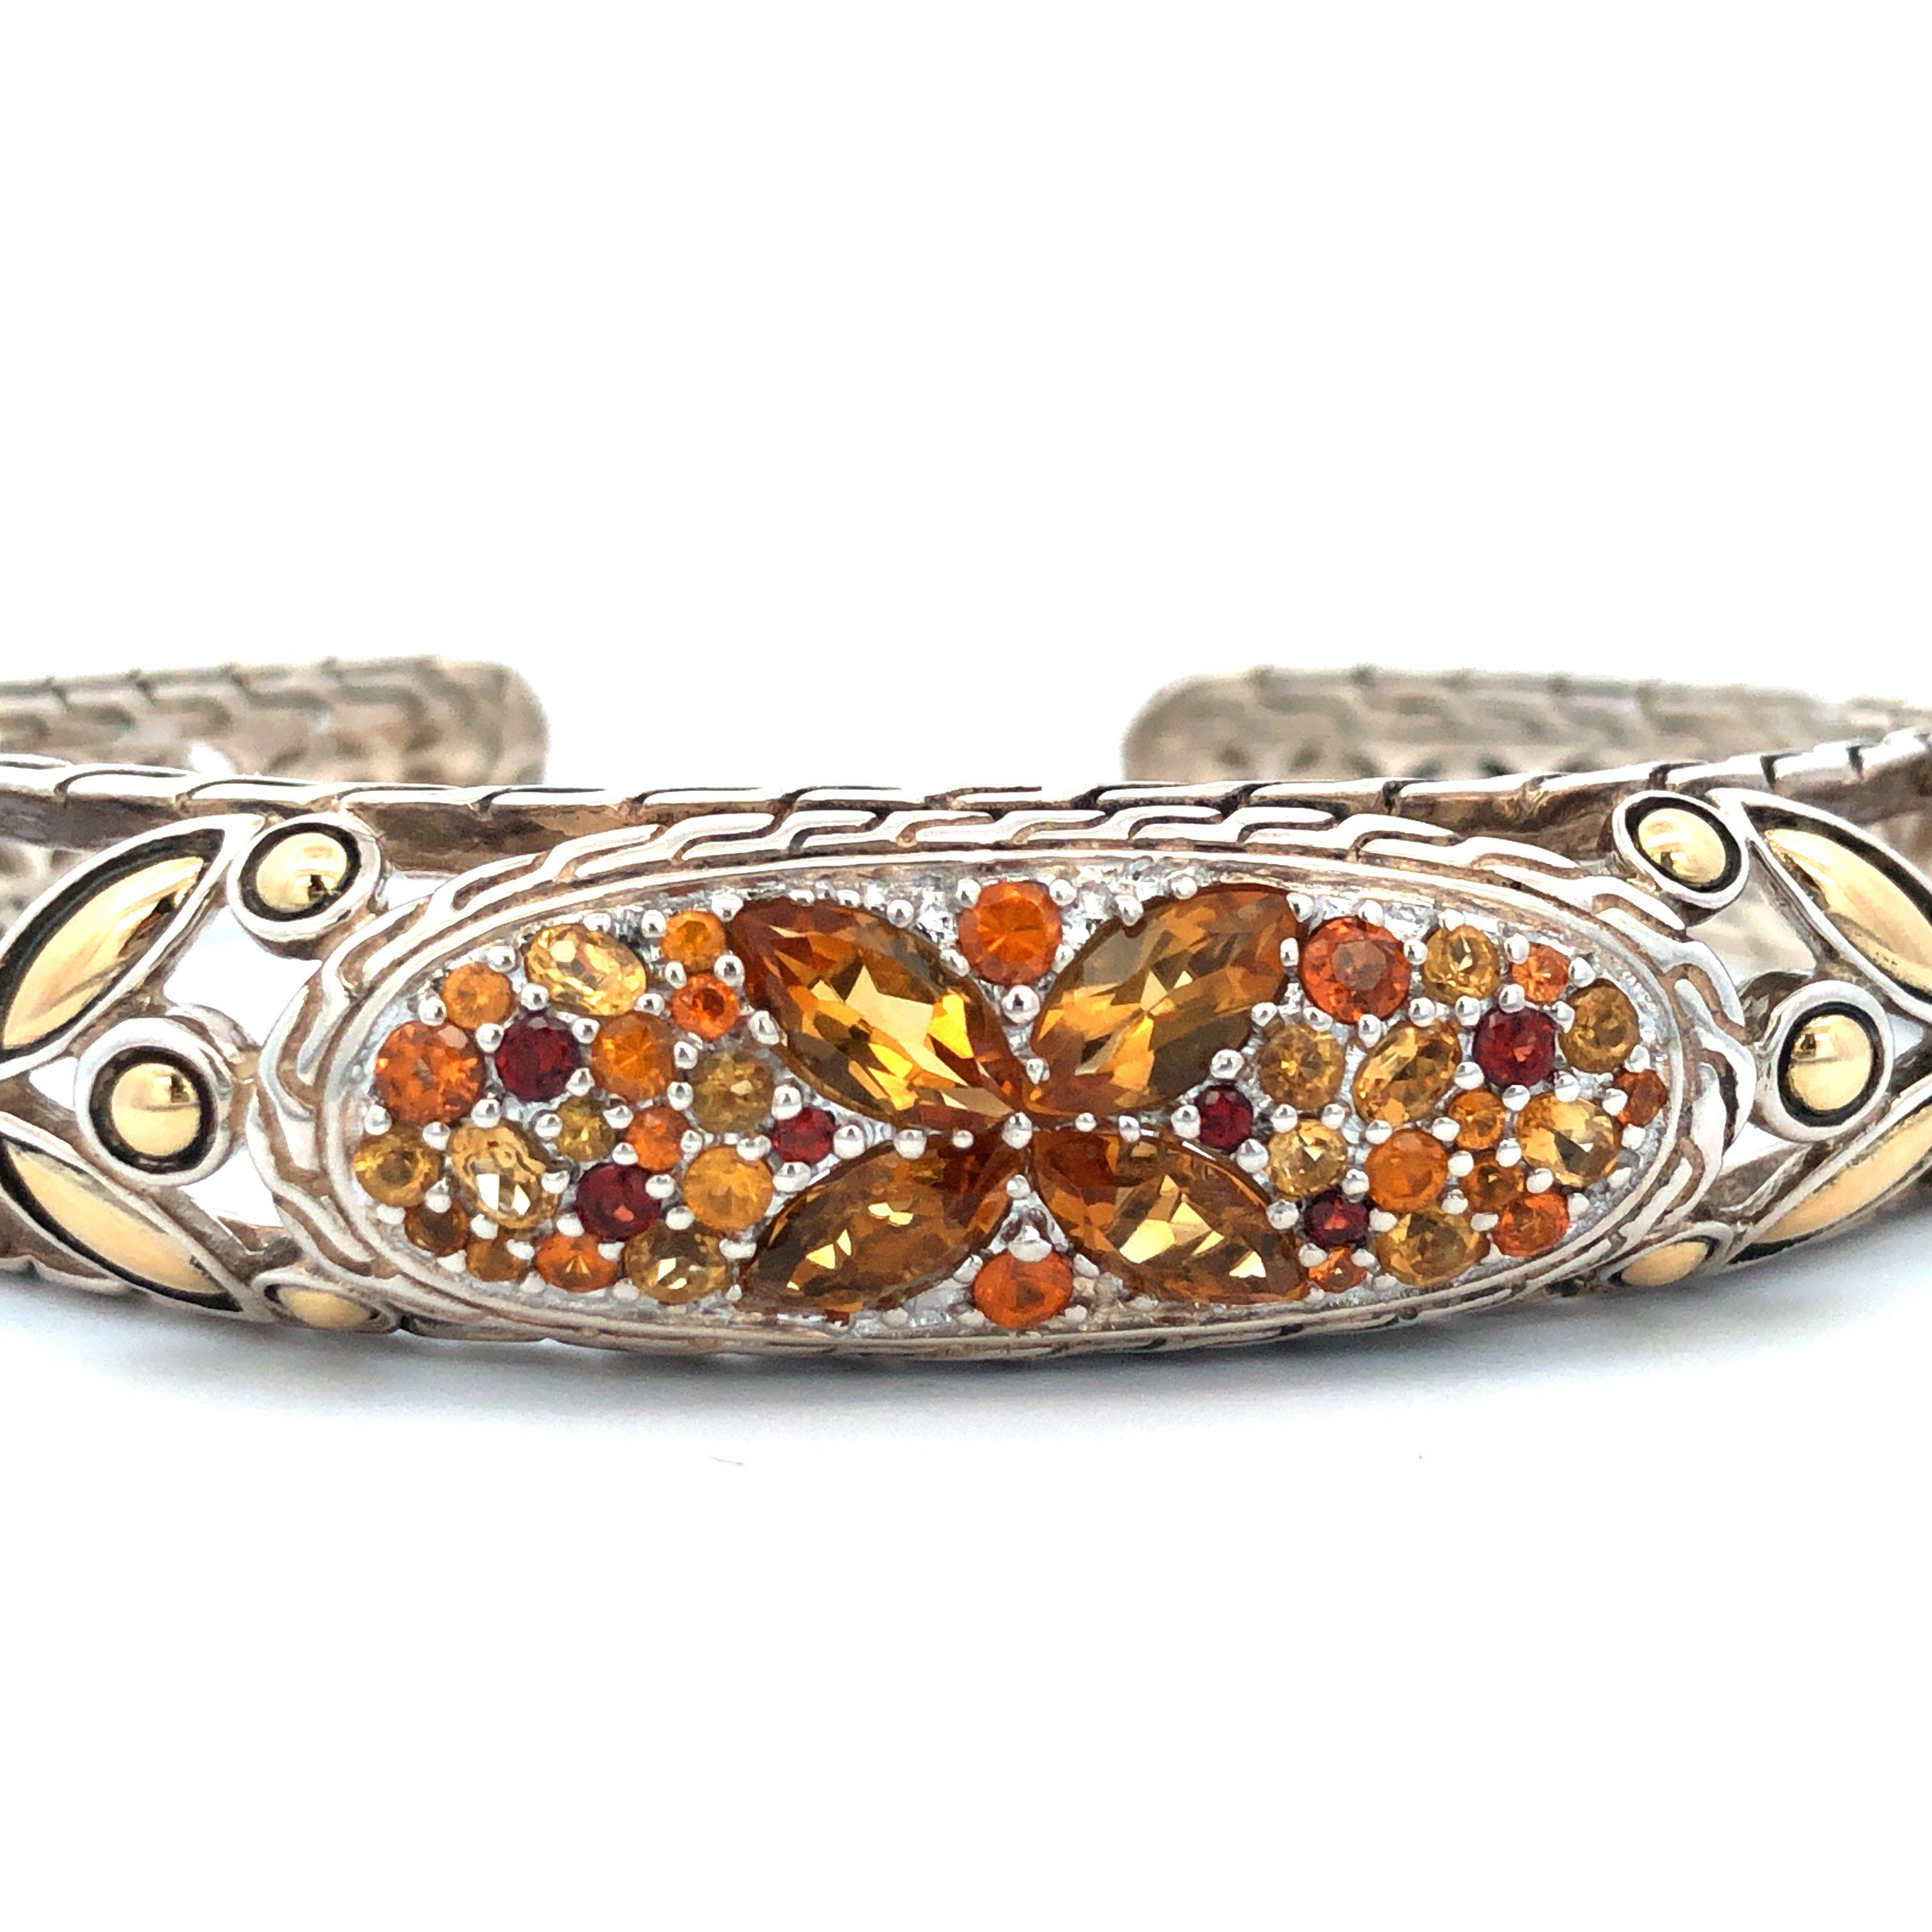 Crafted with meticulous artistry, this captivating cuff bracelet from John Hardy's Batu Kawung collection beautifully combines the cool allure of sterling silver with the warm radiance of 18k yellow gold and vibrant orange tone gemstones.

The